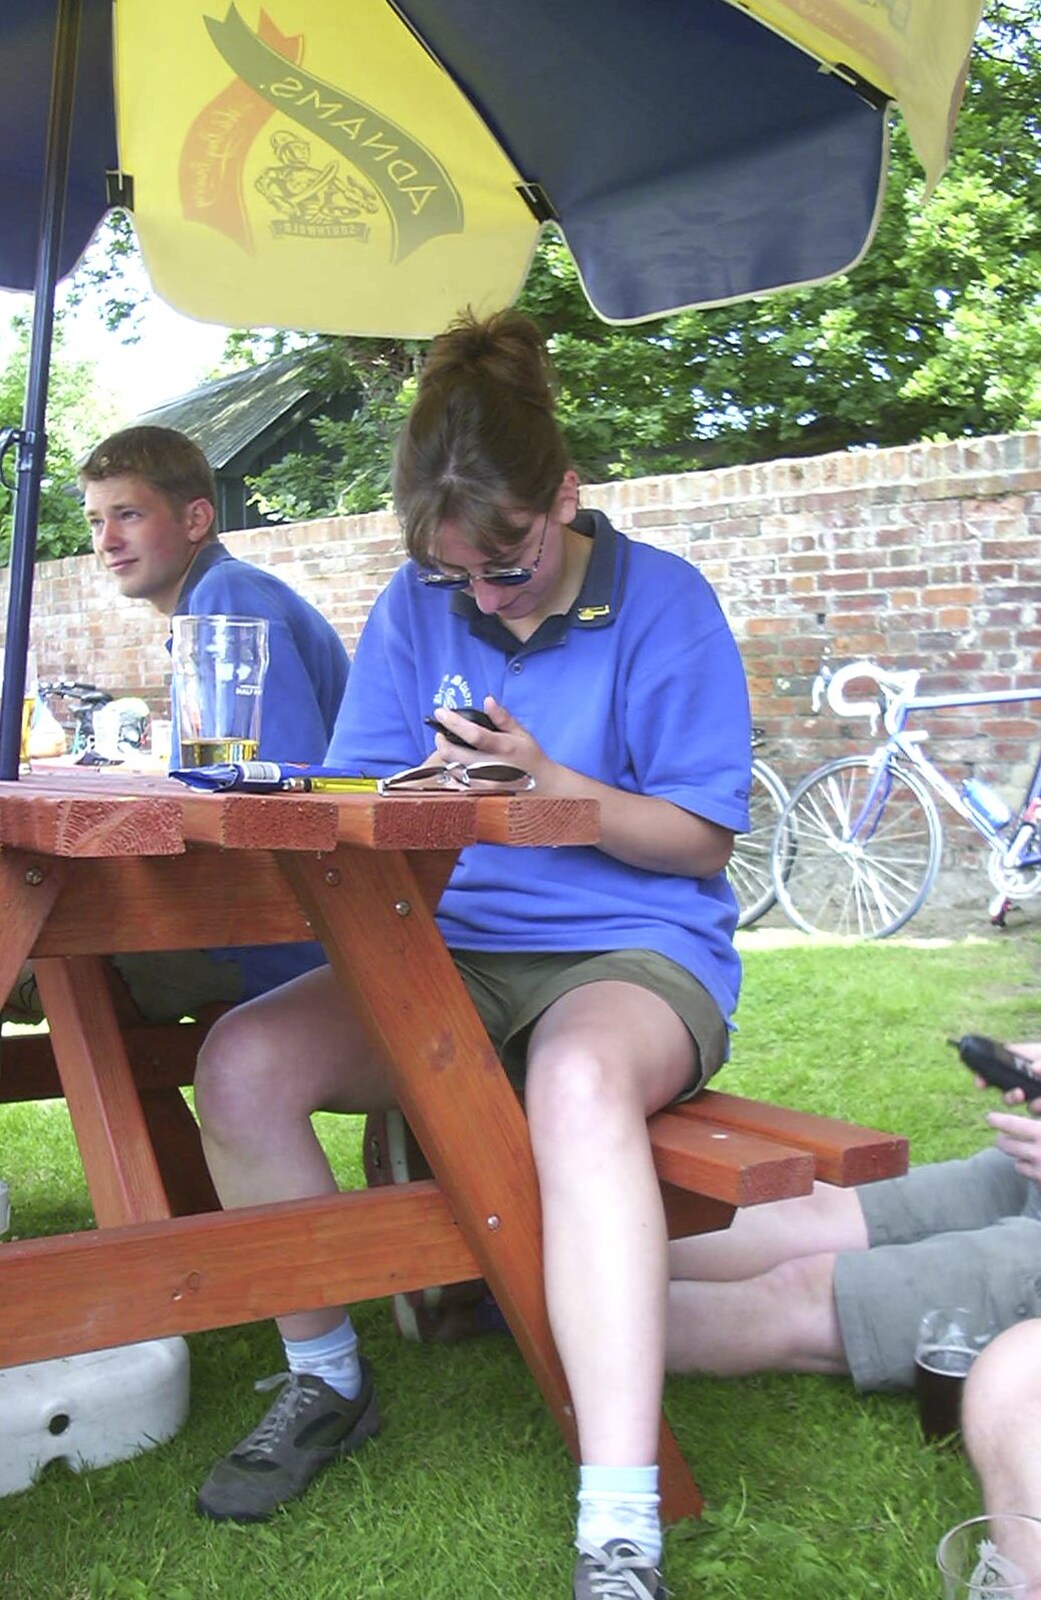 The BSCC Annual Bike Ride, Orford, Suffolk - 12th July 2003: Suey does some furious texting